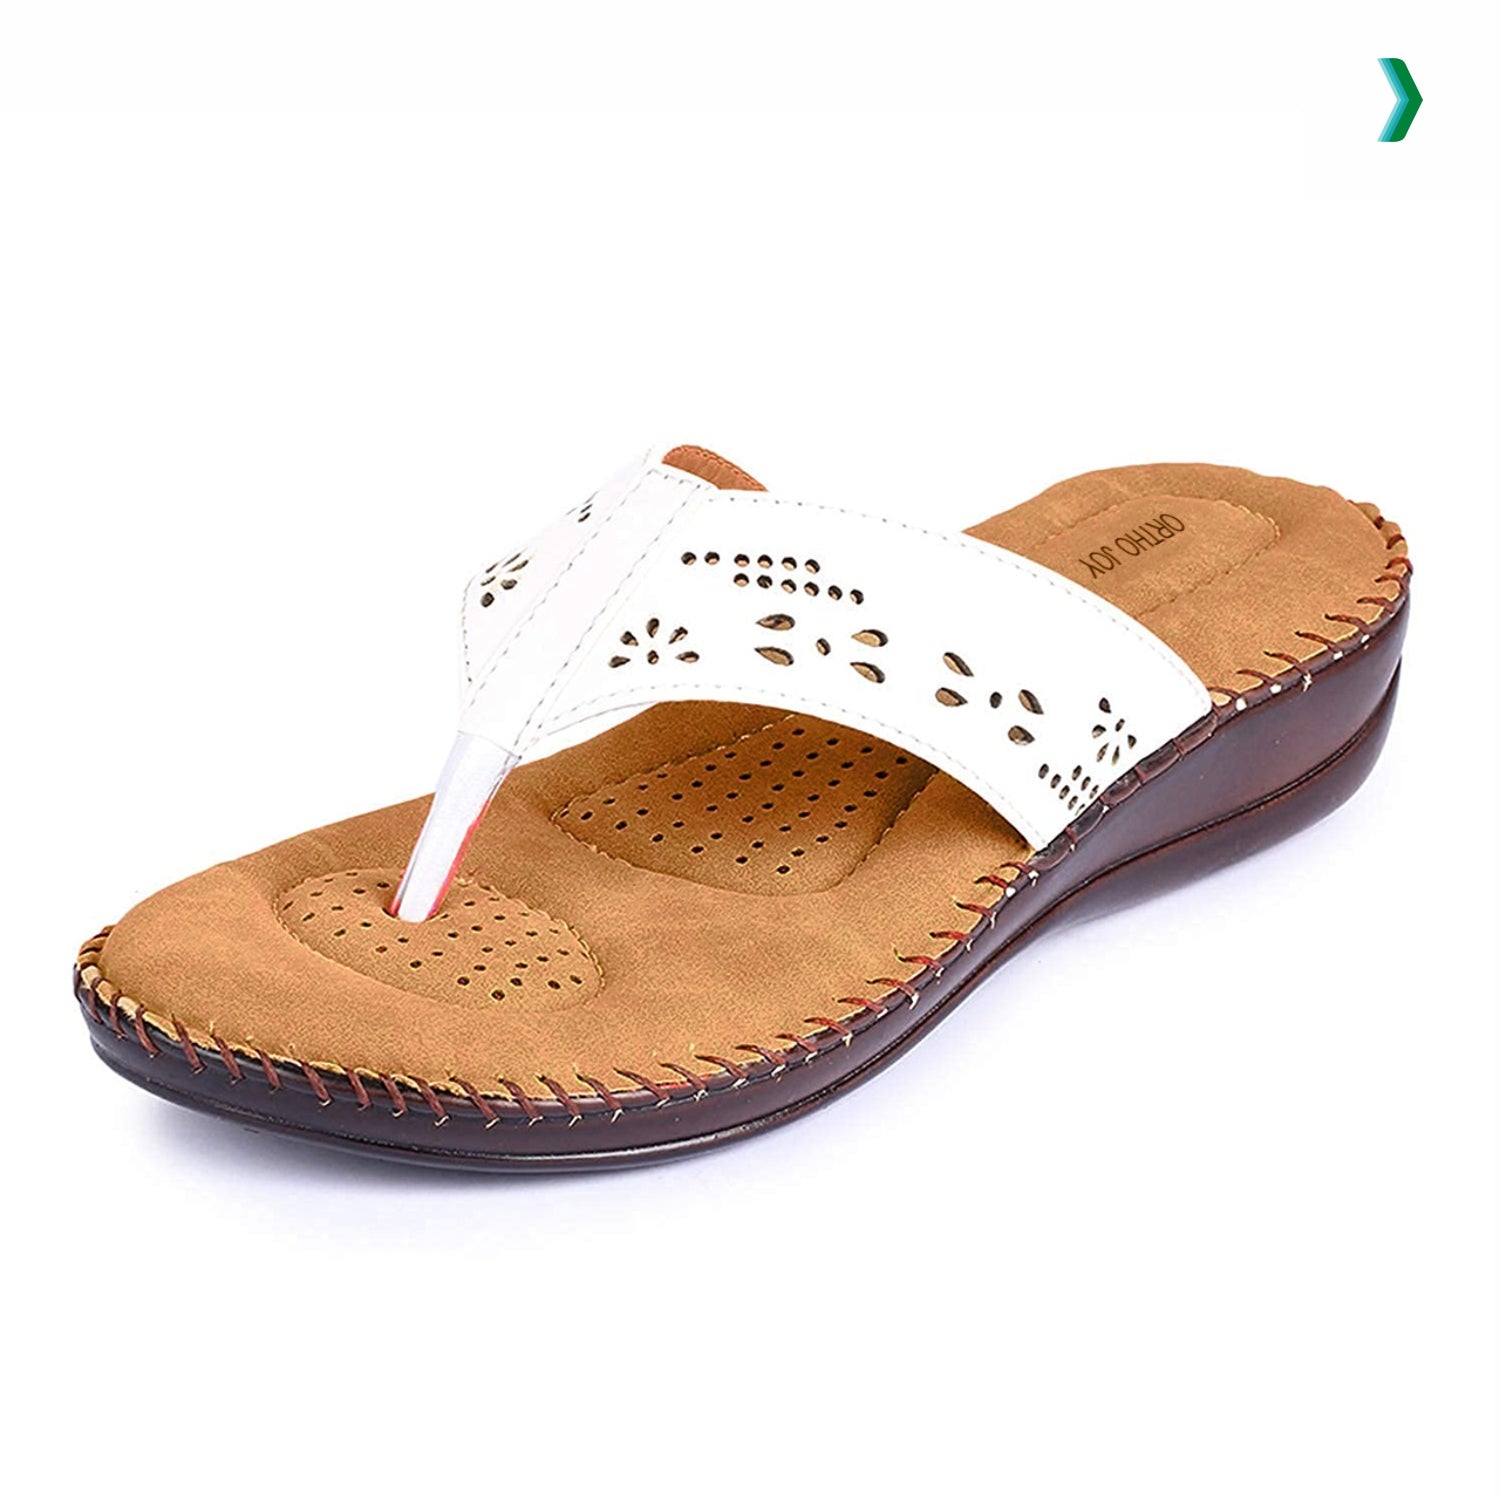 doctor ortho slippers, doctor extra soft slippers, ortho slippers, ortho slippers for women, orthopedic slippers for women, ortho chappal, orthopaedic slippers, ortho chappal for ladies, ortho slippers for ladies, doctor extra soft slippers for ladies, extra soft chappals for ladies, extra soft slippers for ladies, soft doctor chappal for ladies, best ortho slippers, ortho soft slippers, ortho joy slippers, best ortho slippers for women 